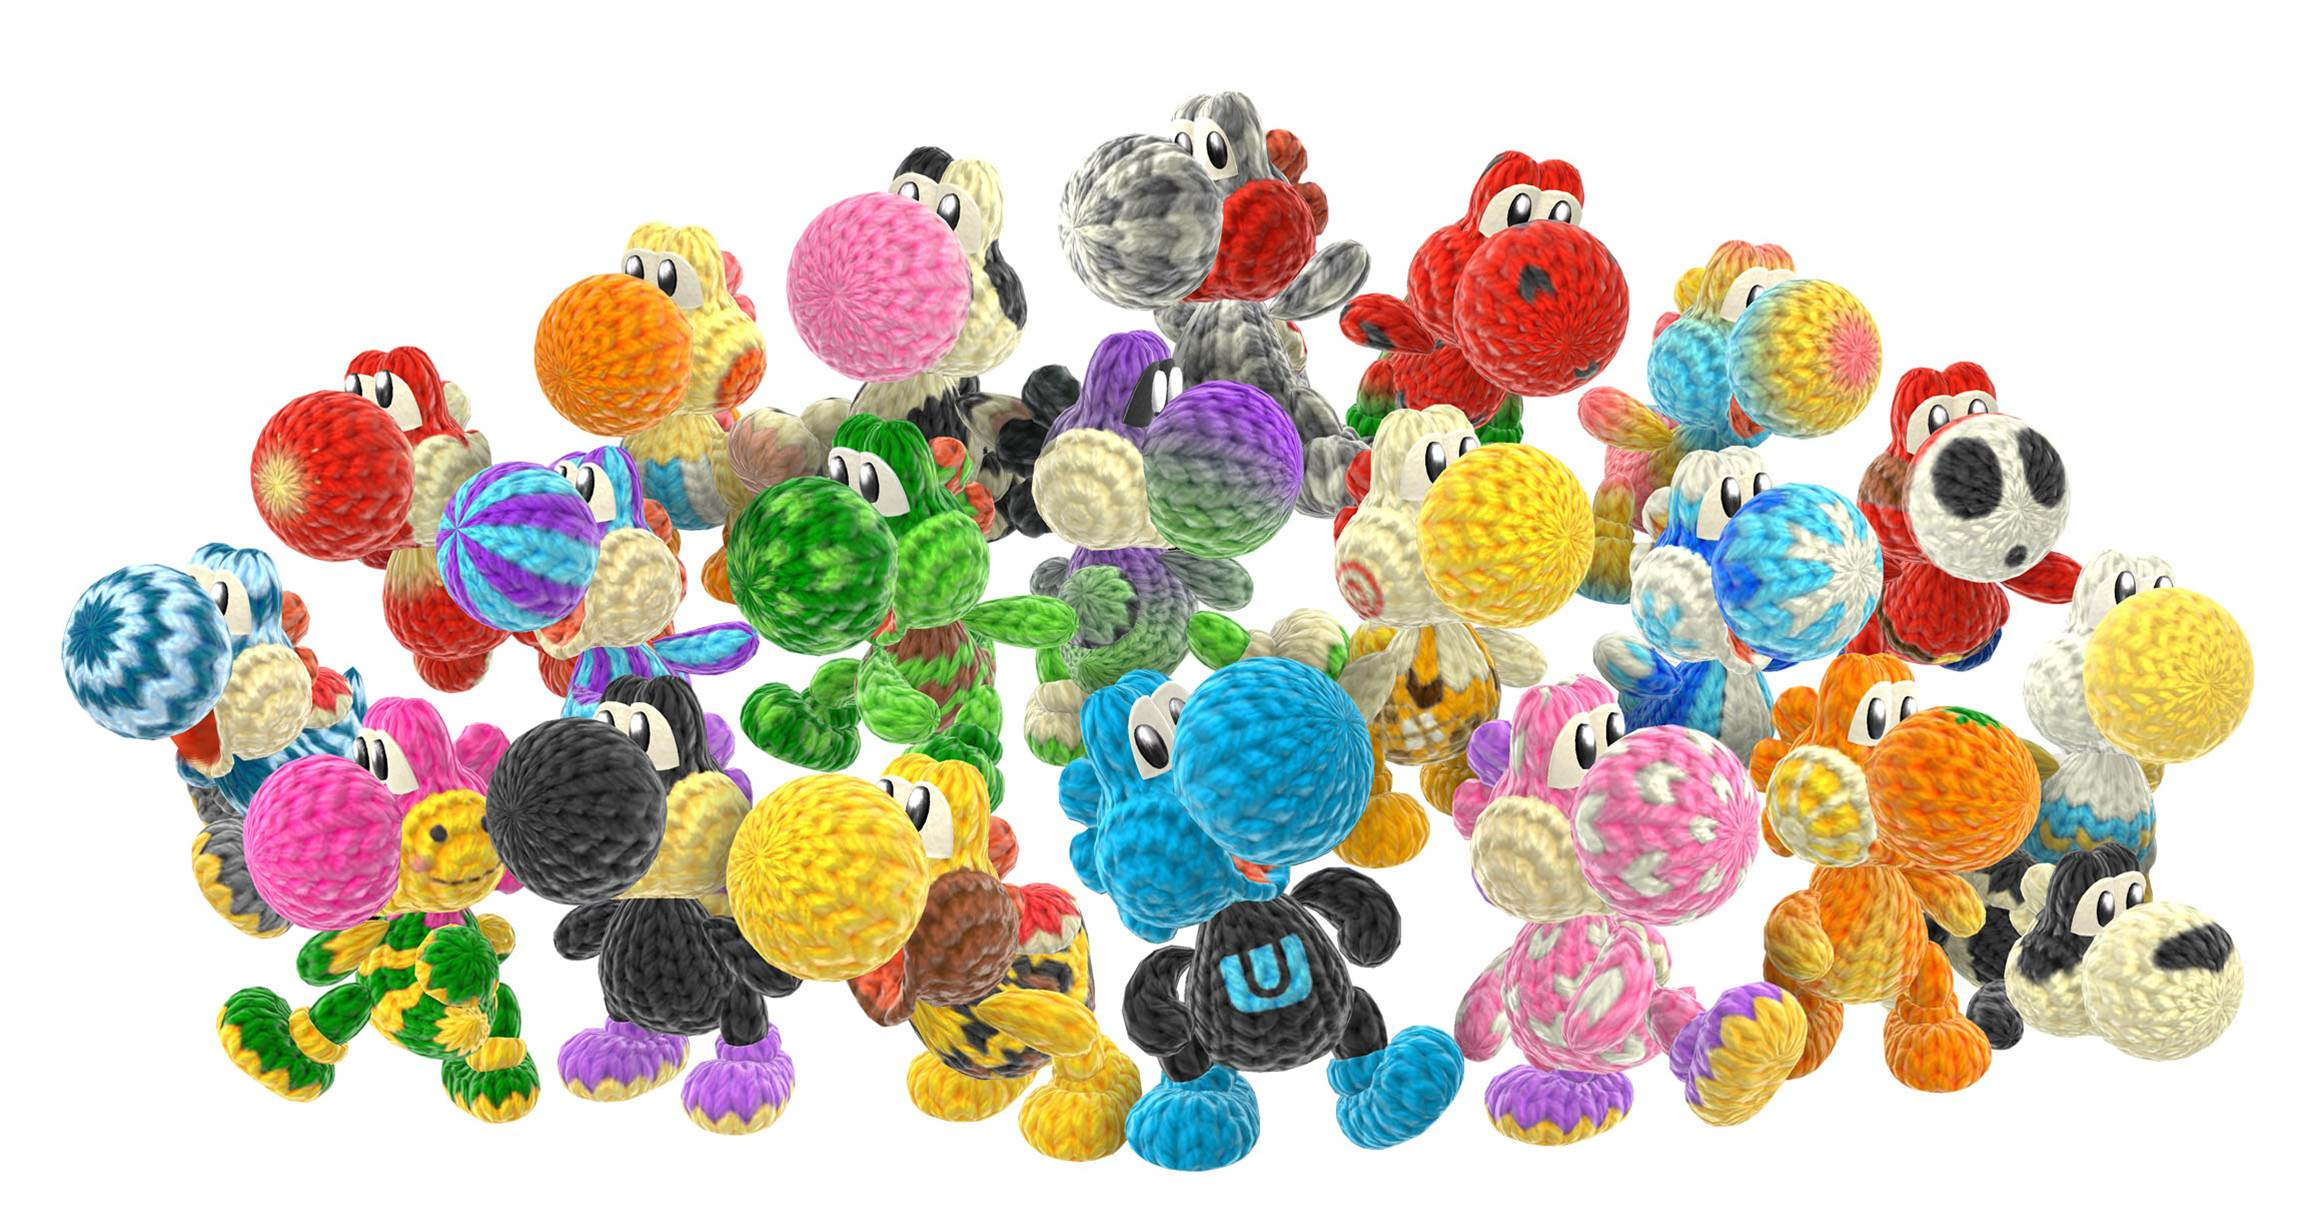 yoshis woolly world review